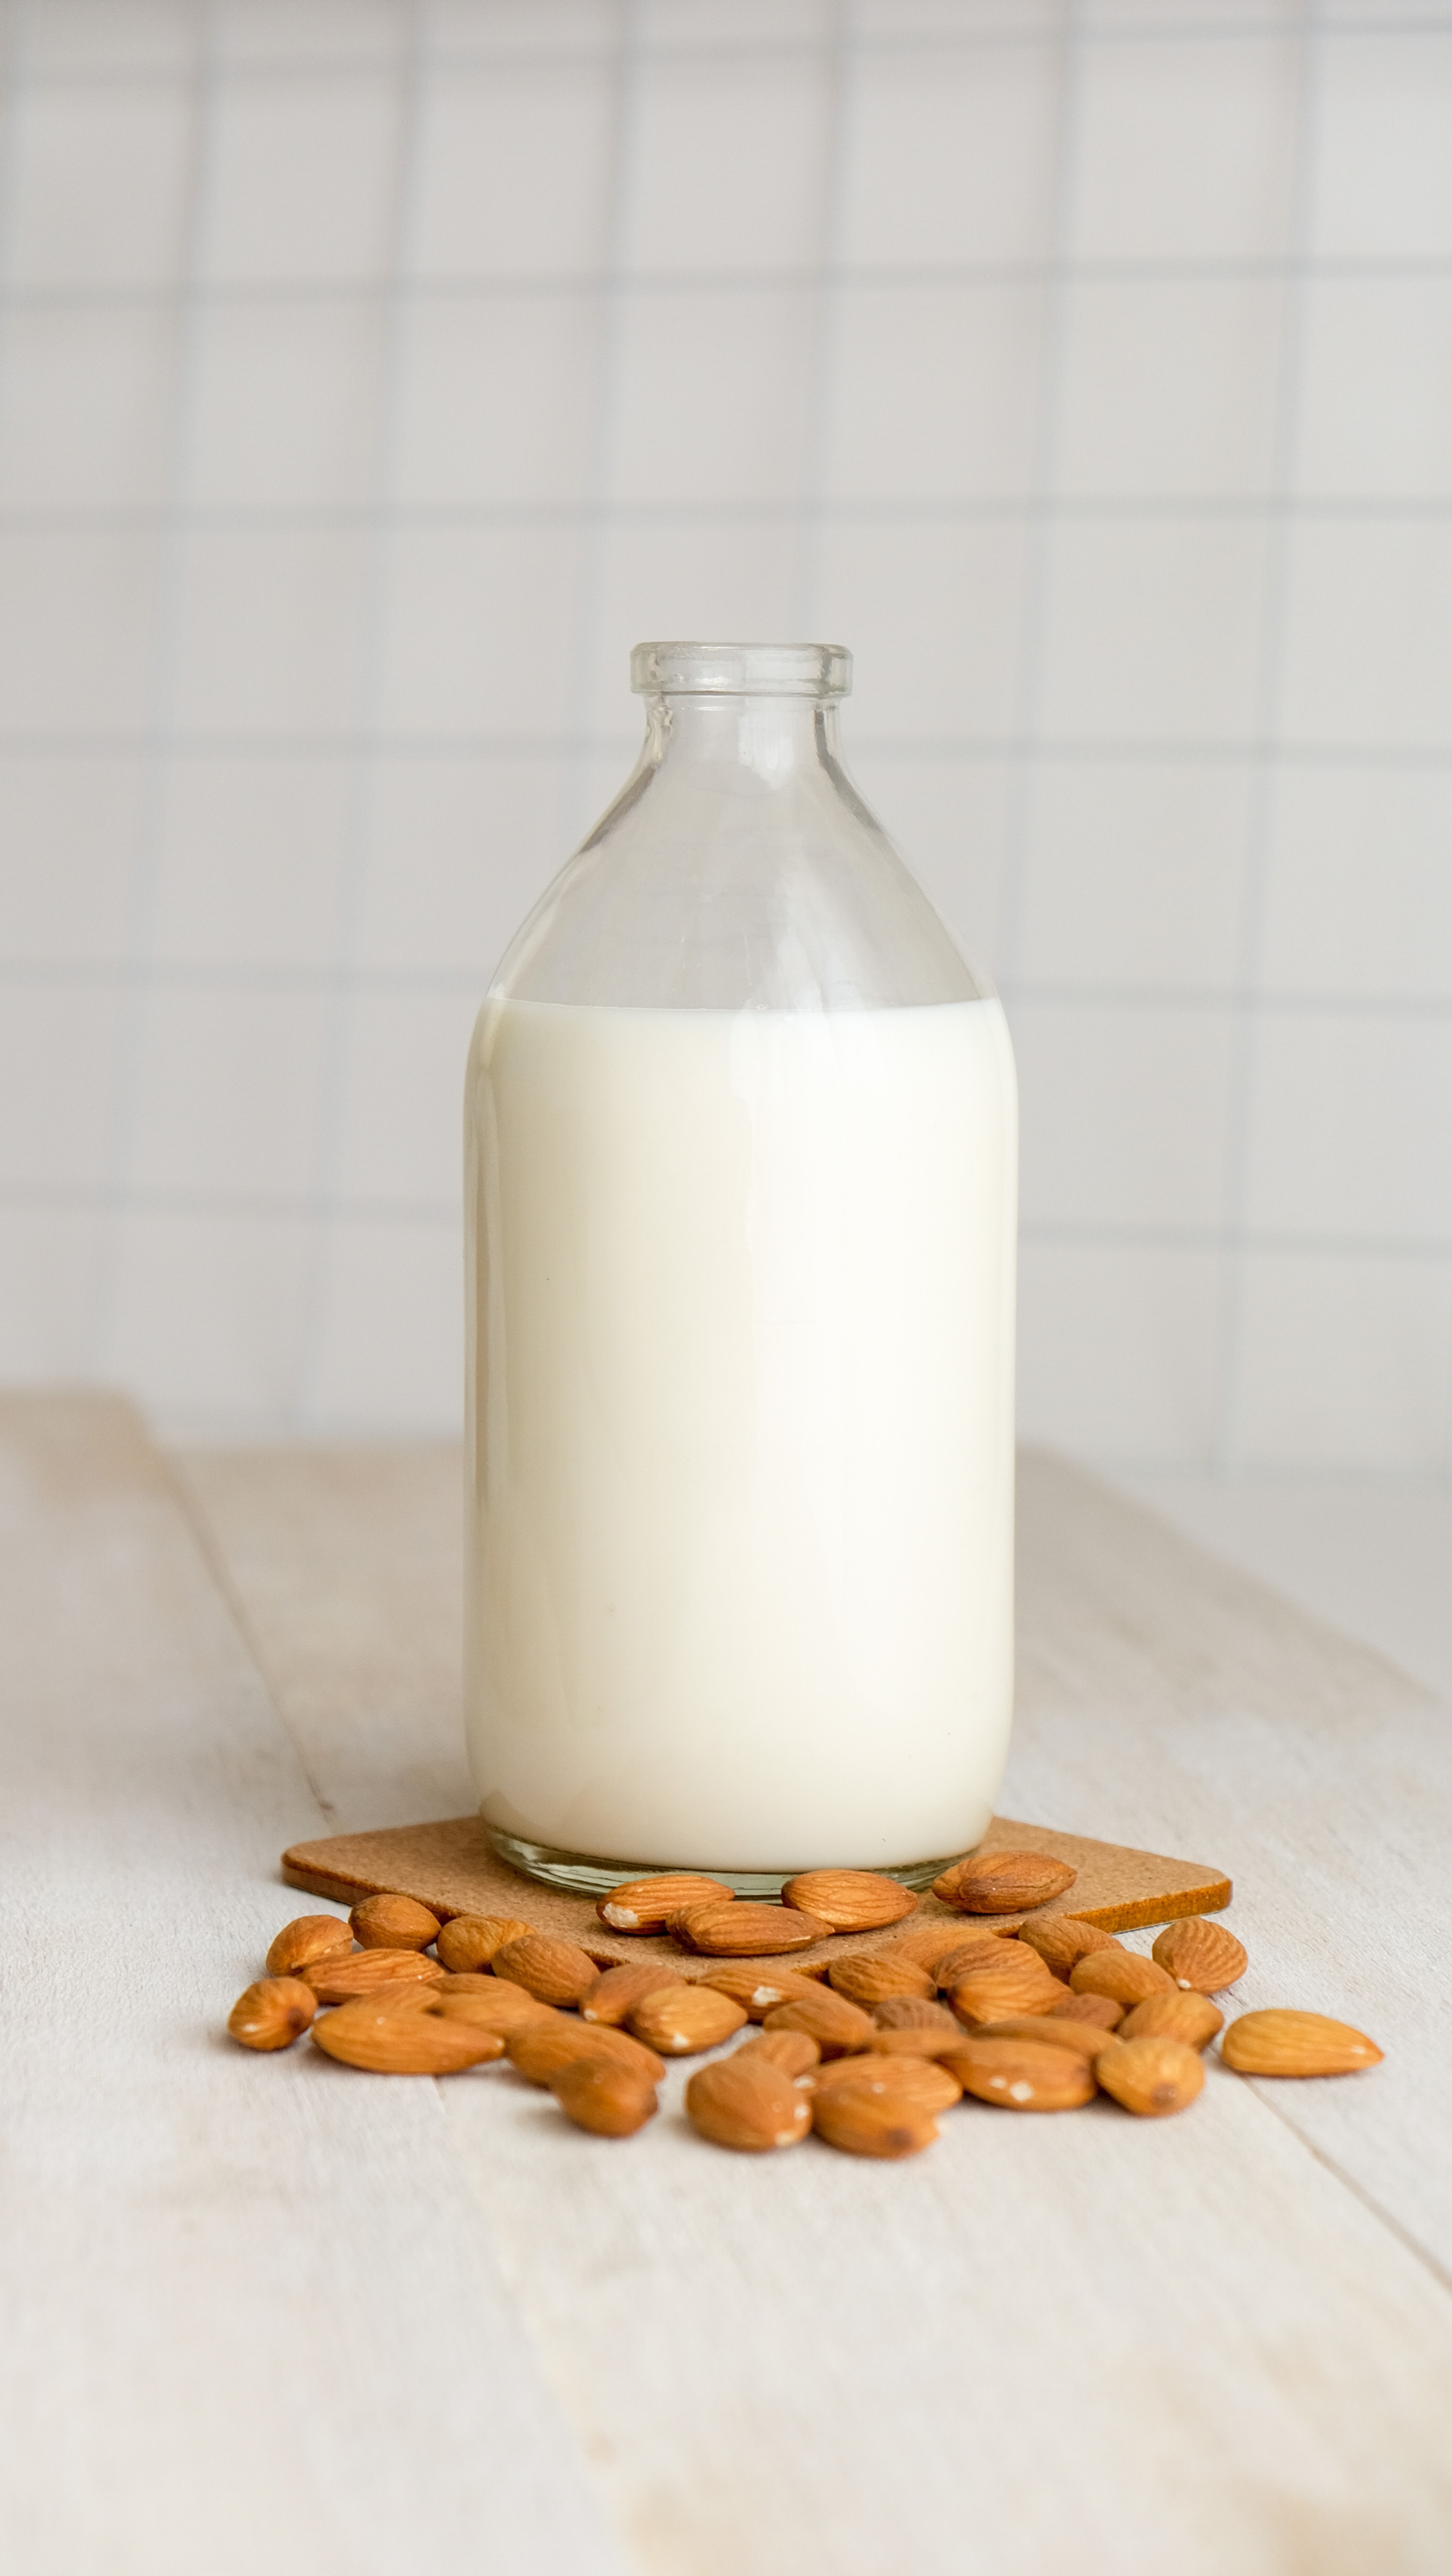 You can make nut milks yourself at home using nuts, water, salt, a blender, jar, cheesecloth, and time – no farm animals required.